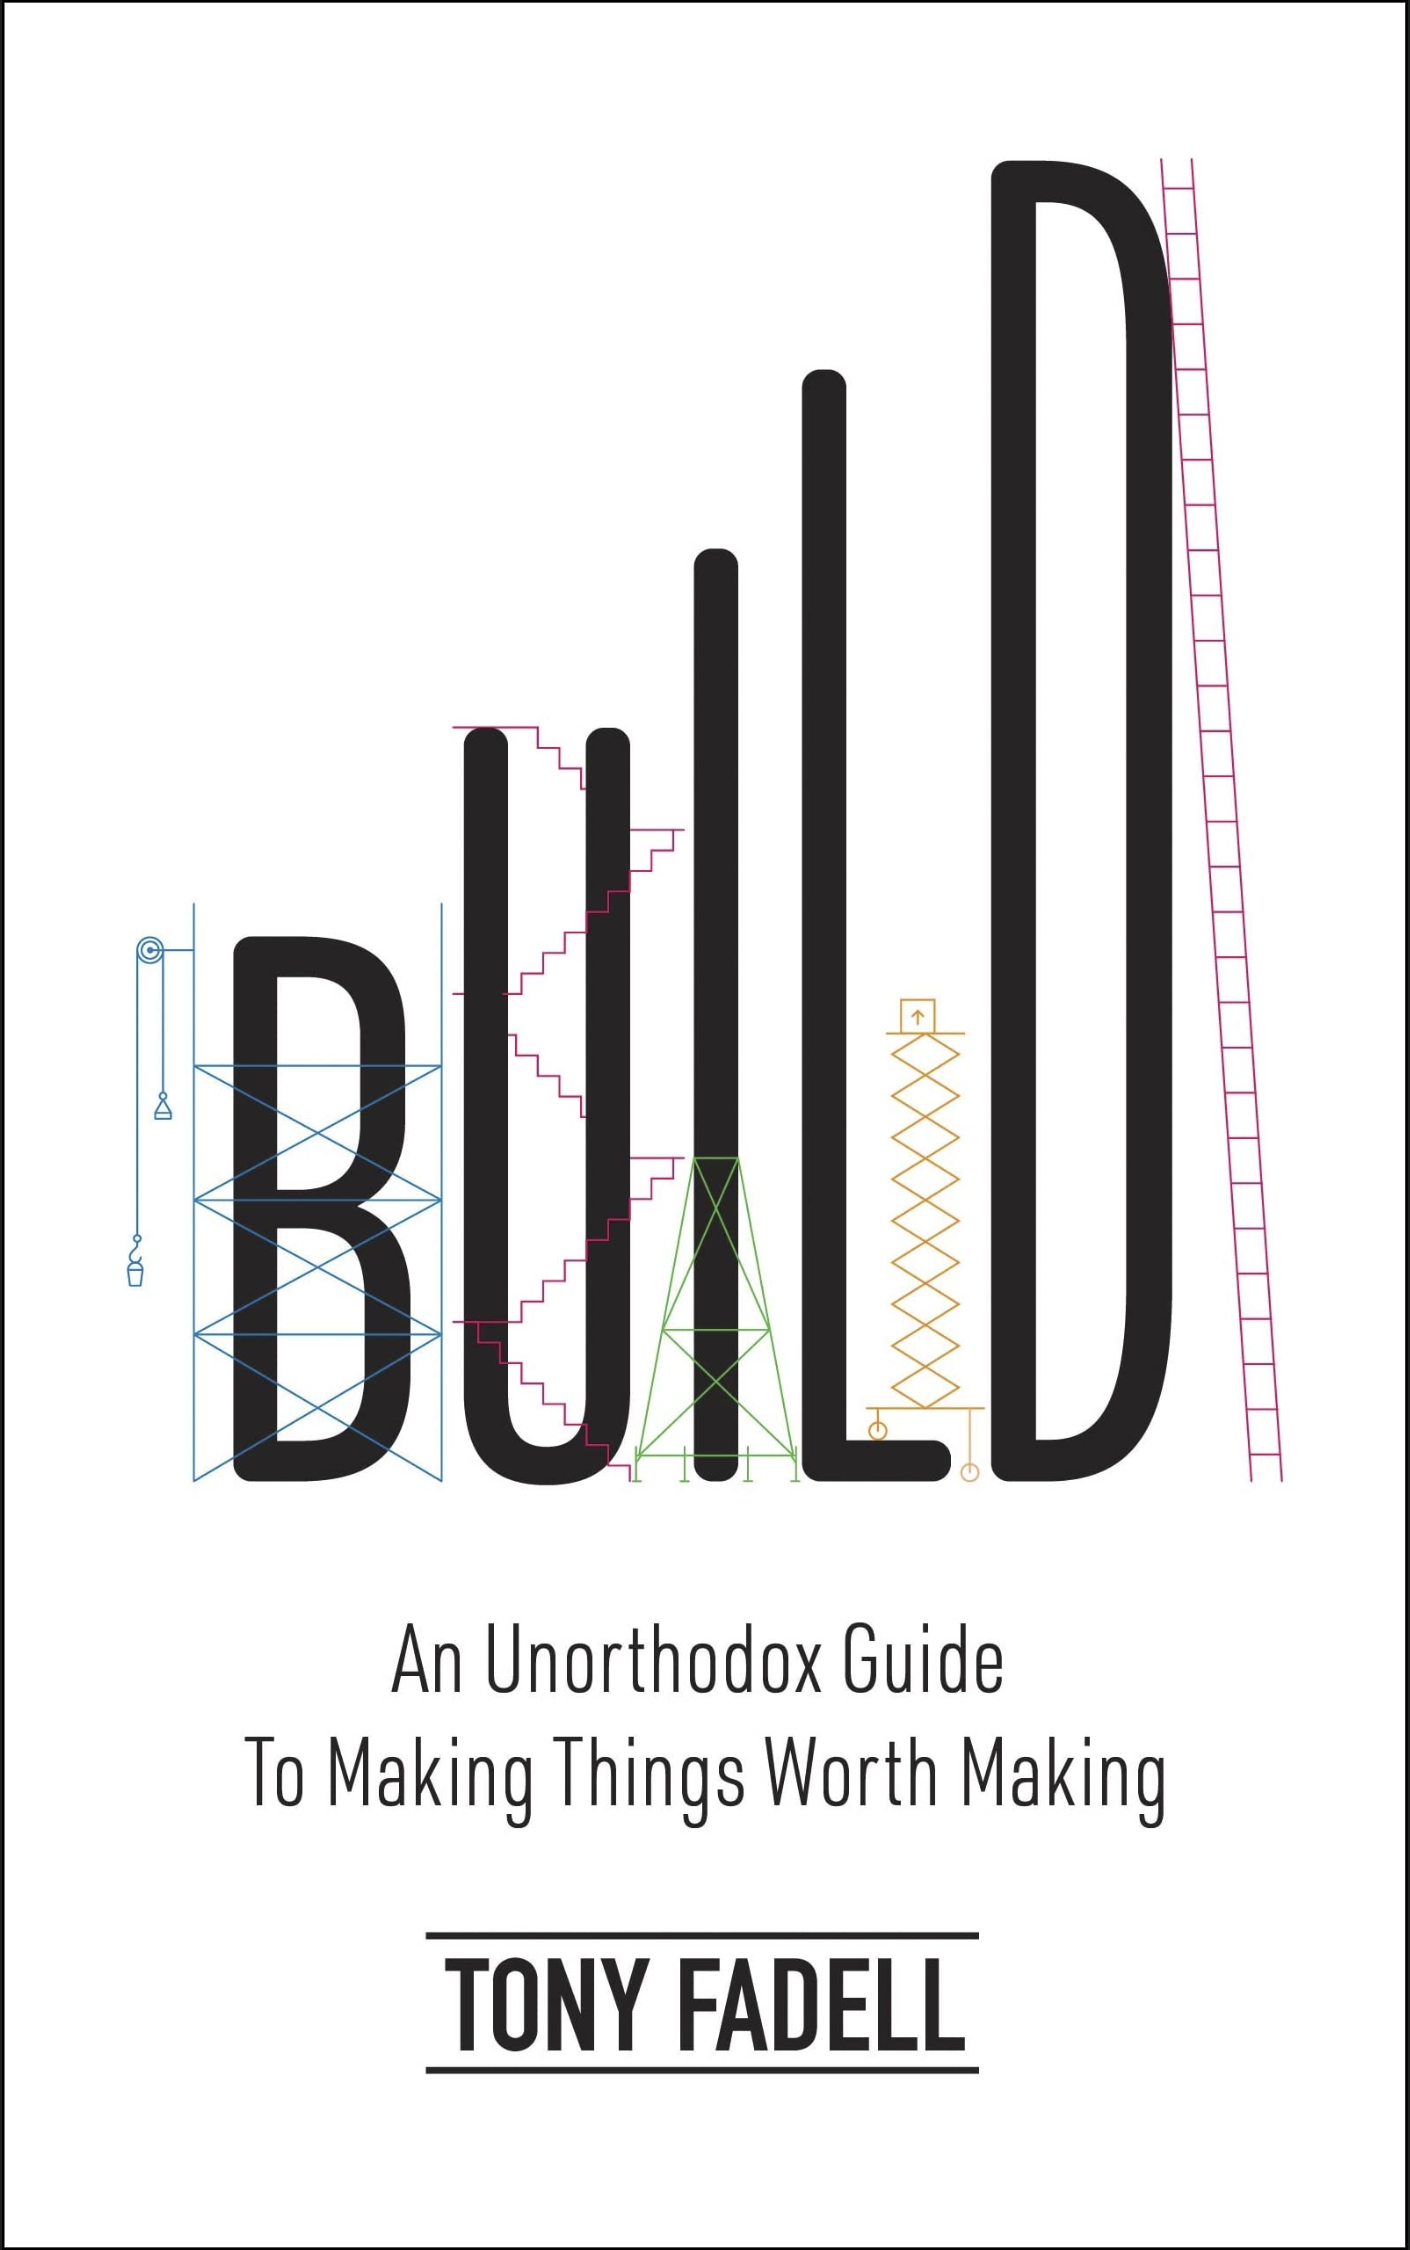 AN UNORTHODOX GUIDE TO MAKING THINGS WORTH MAKING